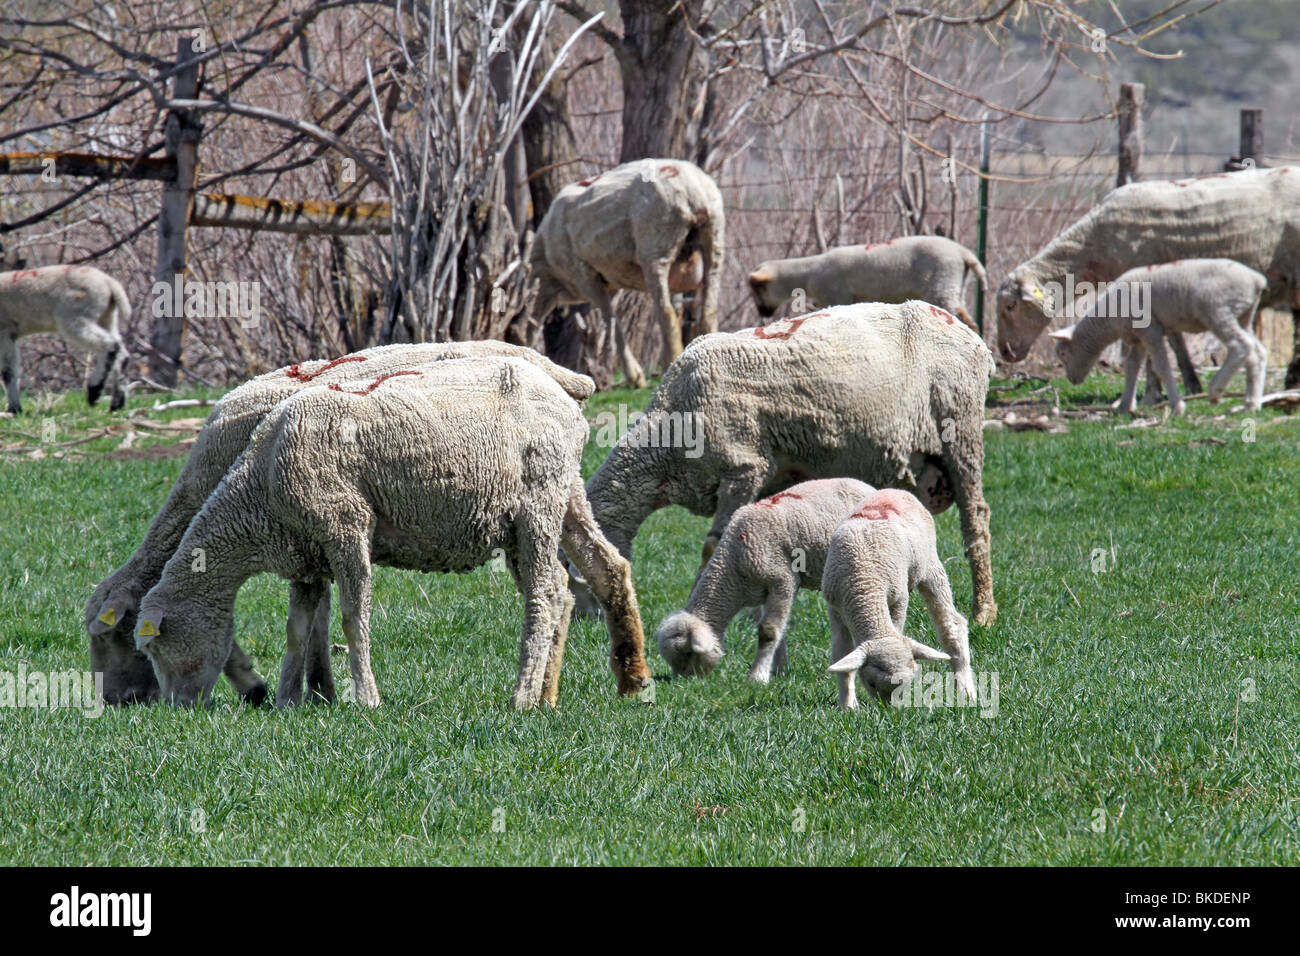 Ewe and lamb in green grass field eating. Early summer after sheep have been sheared. Don Despain of Rekindle Photo. Stock Photo